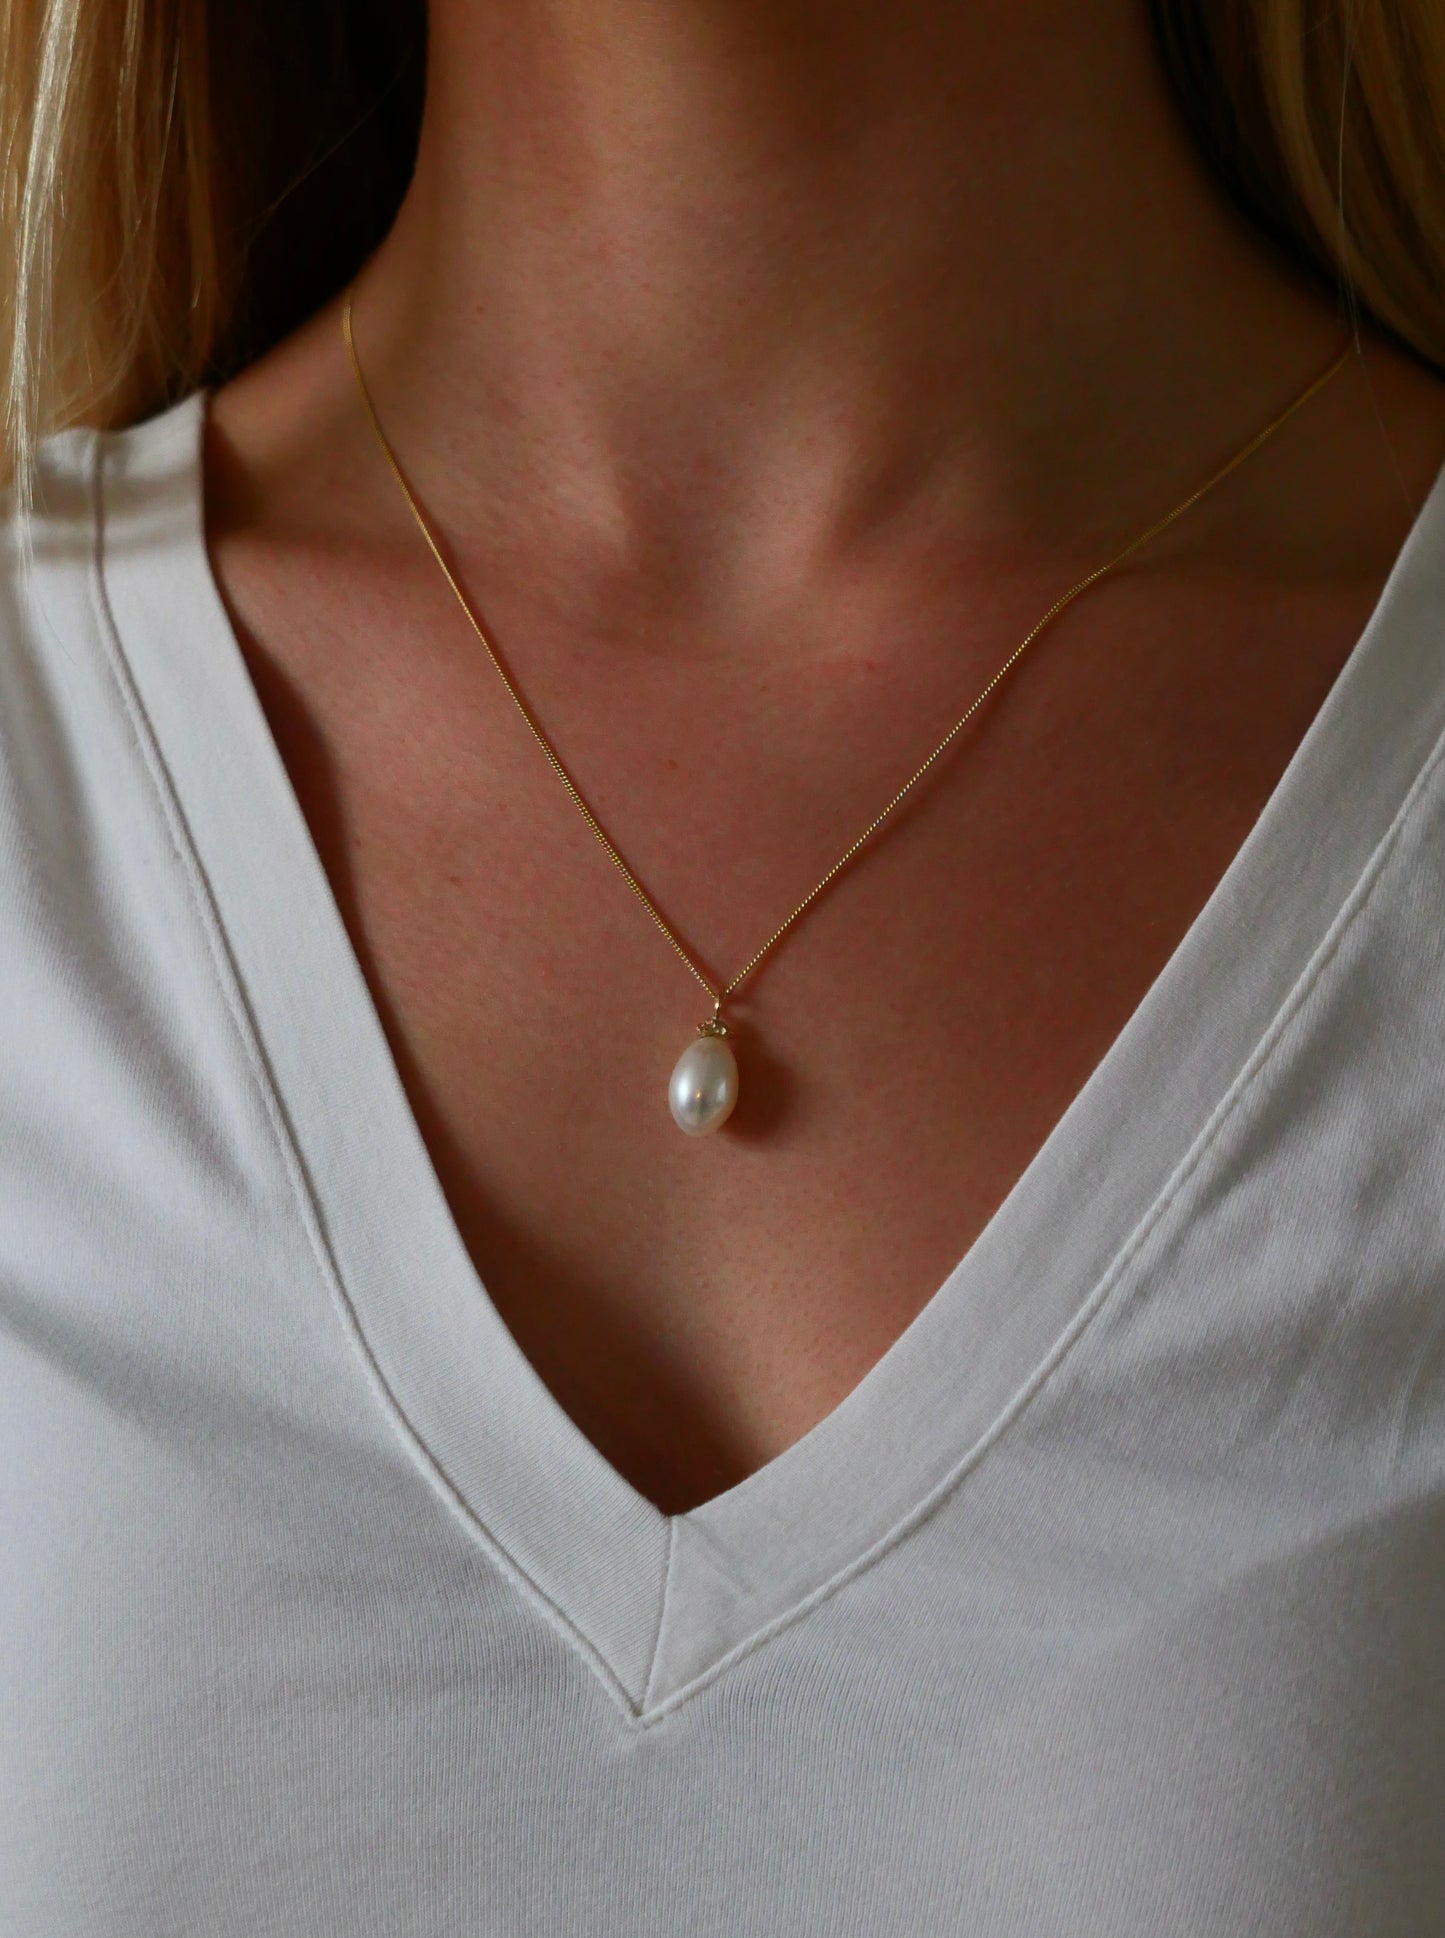 Baroque pearl and gold nugget pendant necklace on model with white v-neck tshirt